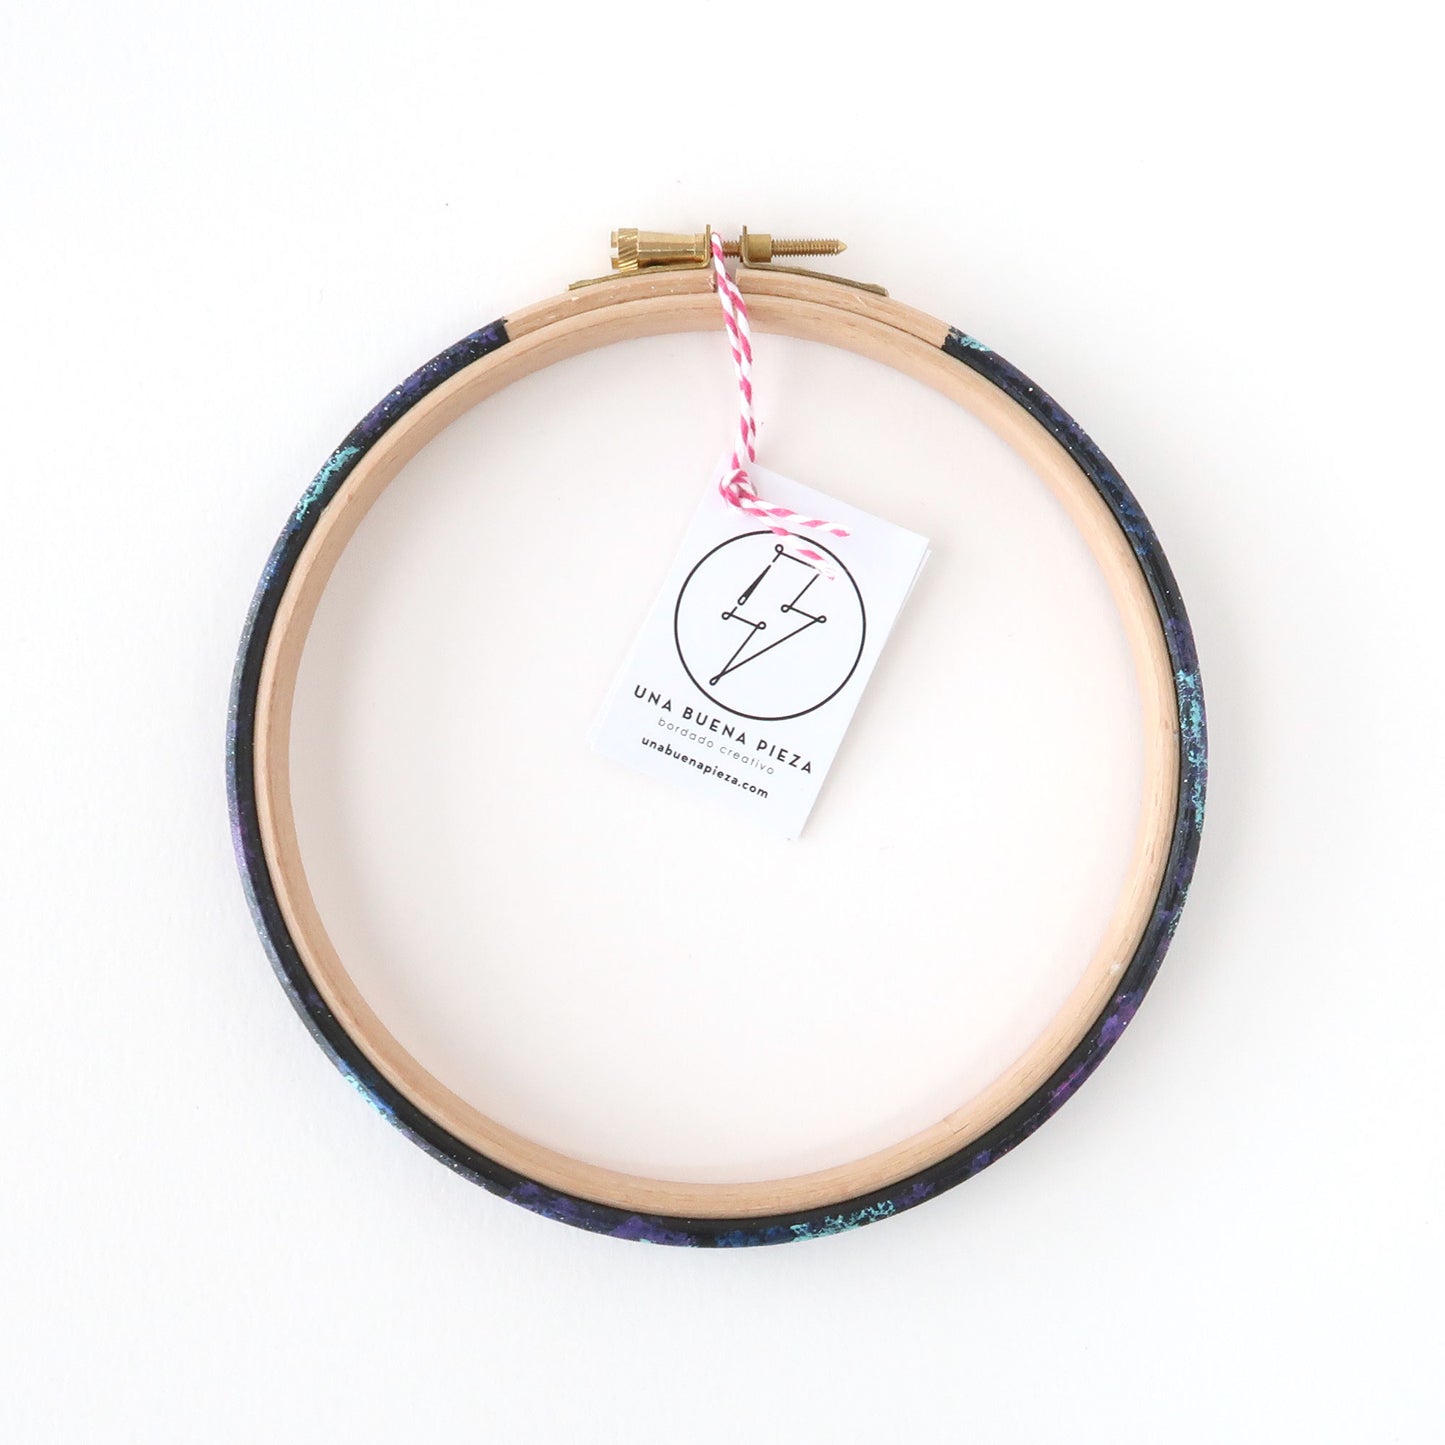 Decorated Embroidery Hoop